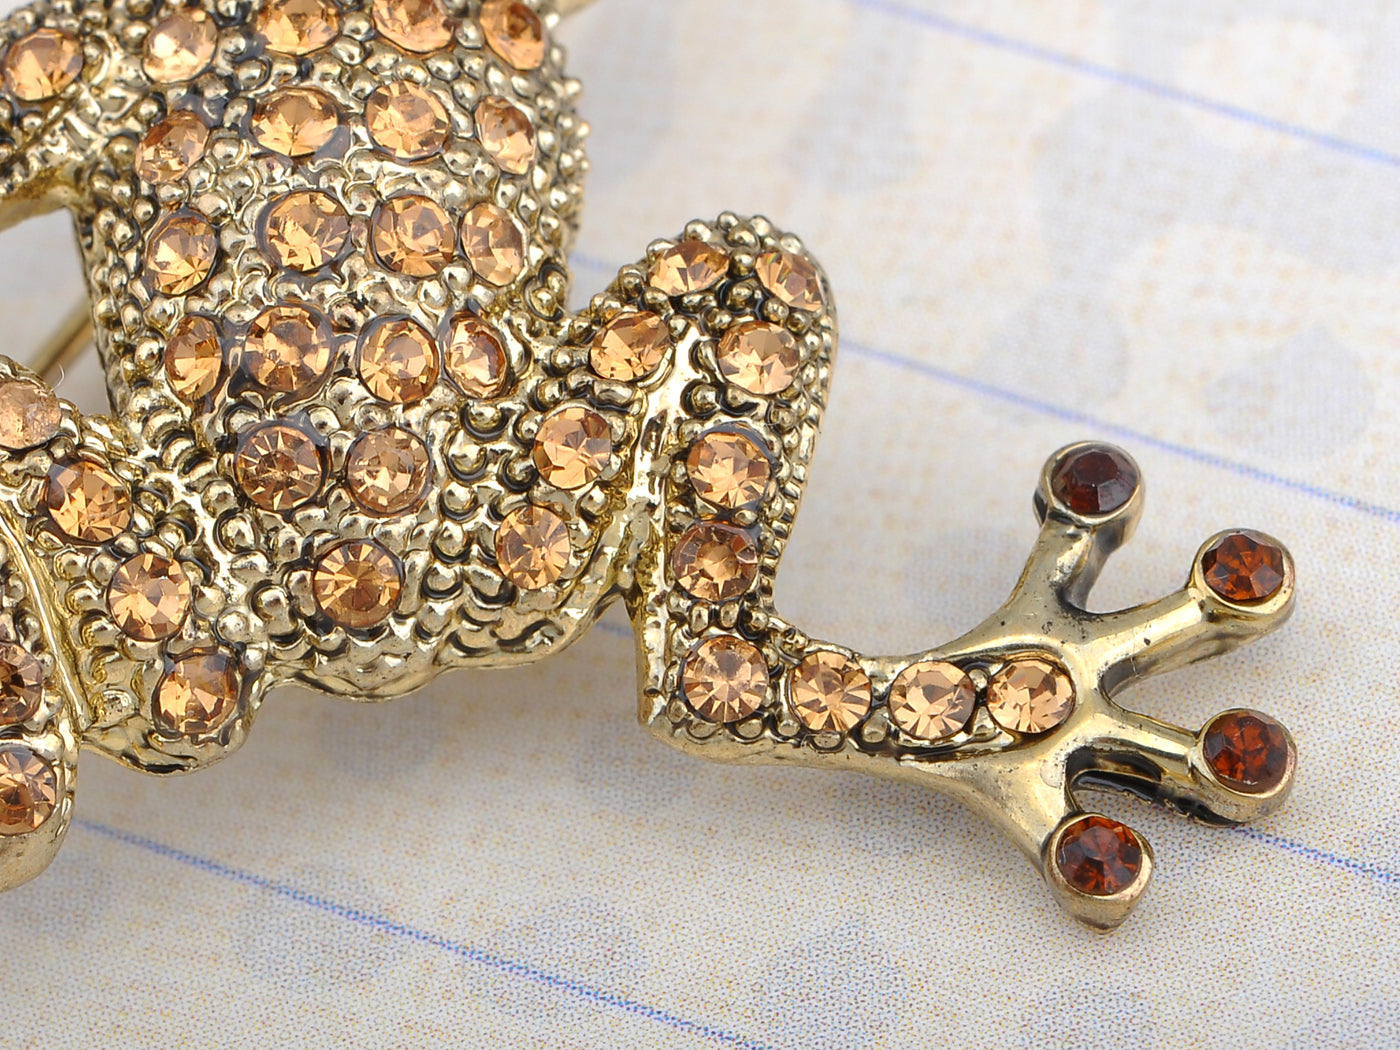 Topaz Colored Frog Toad Brooch Pin